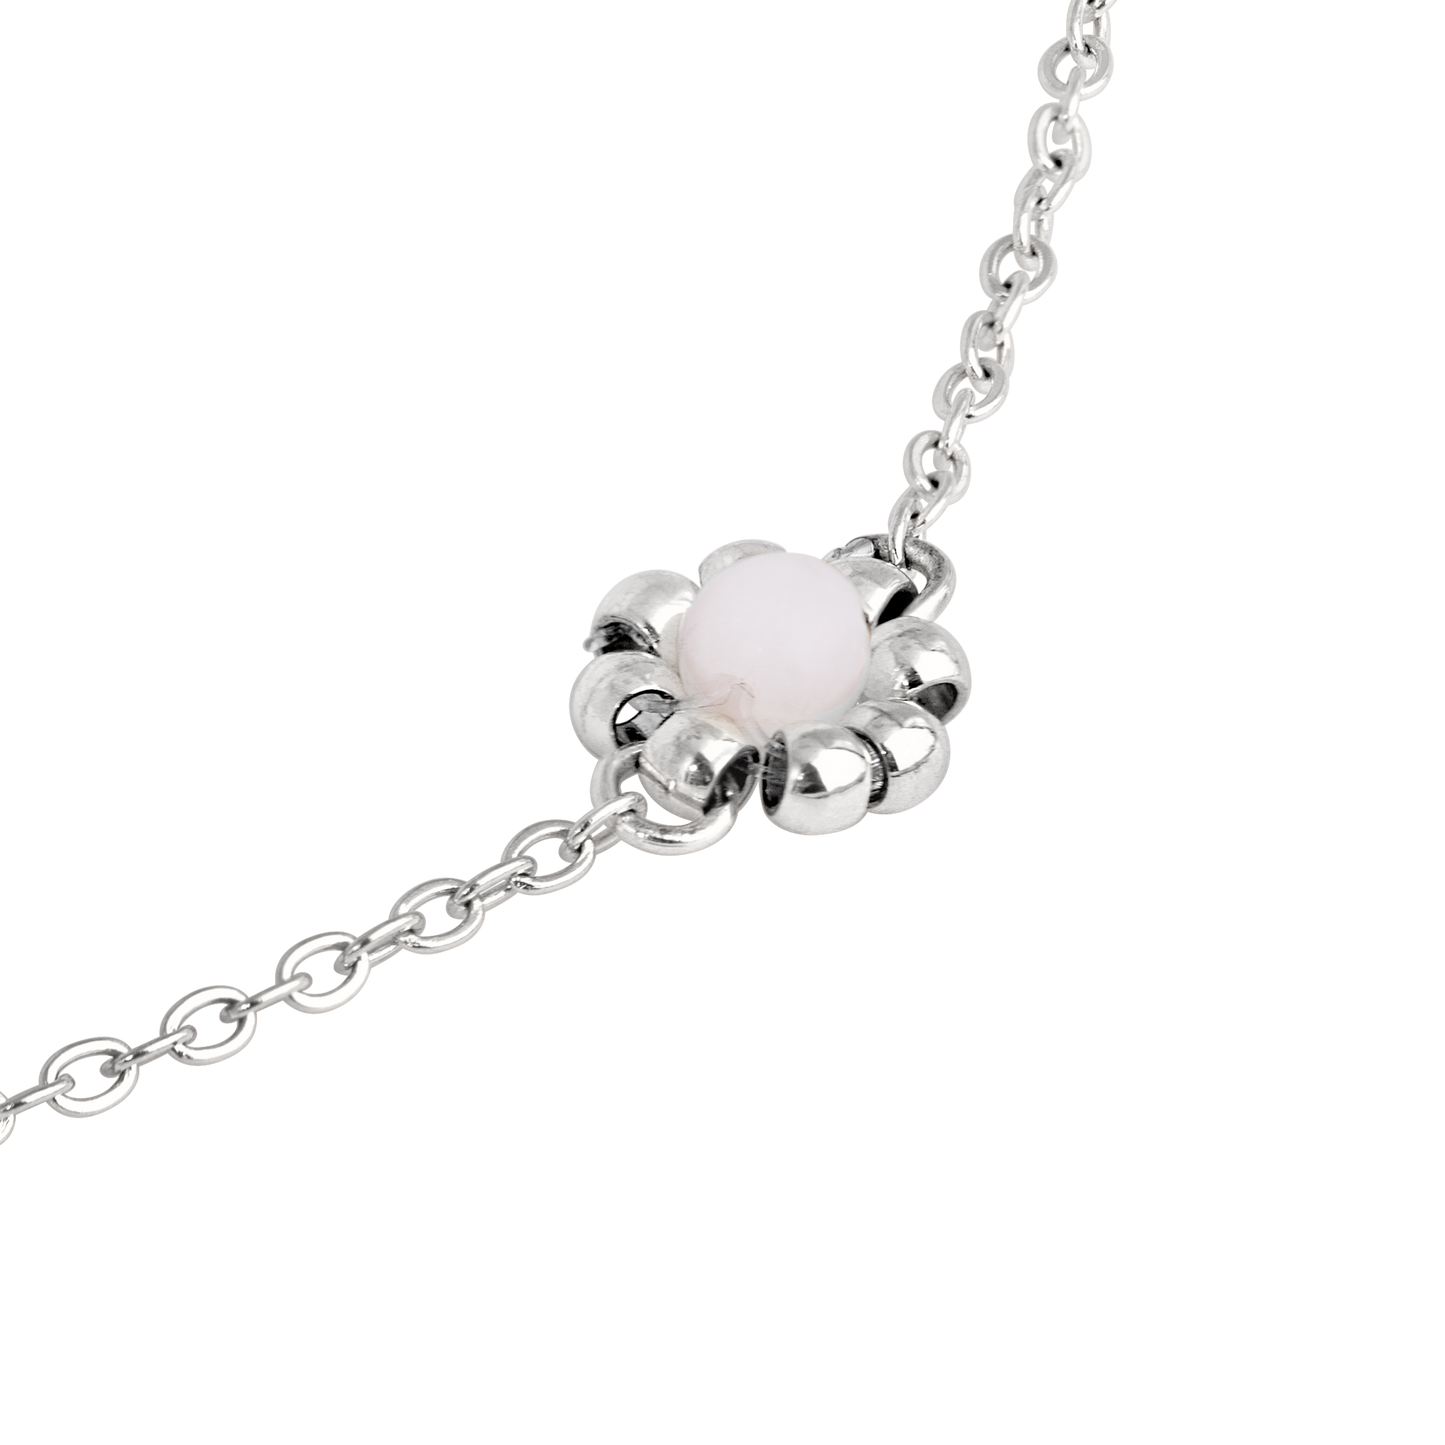 Flower 'n' Beads Necklace Silver